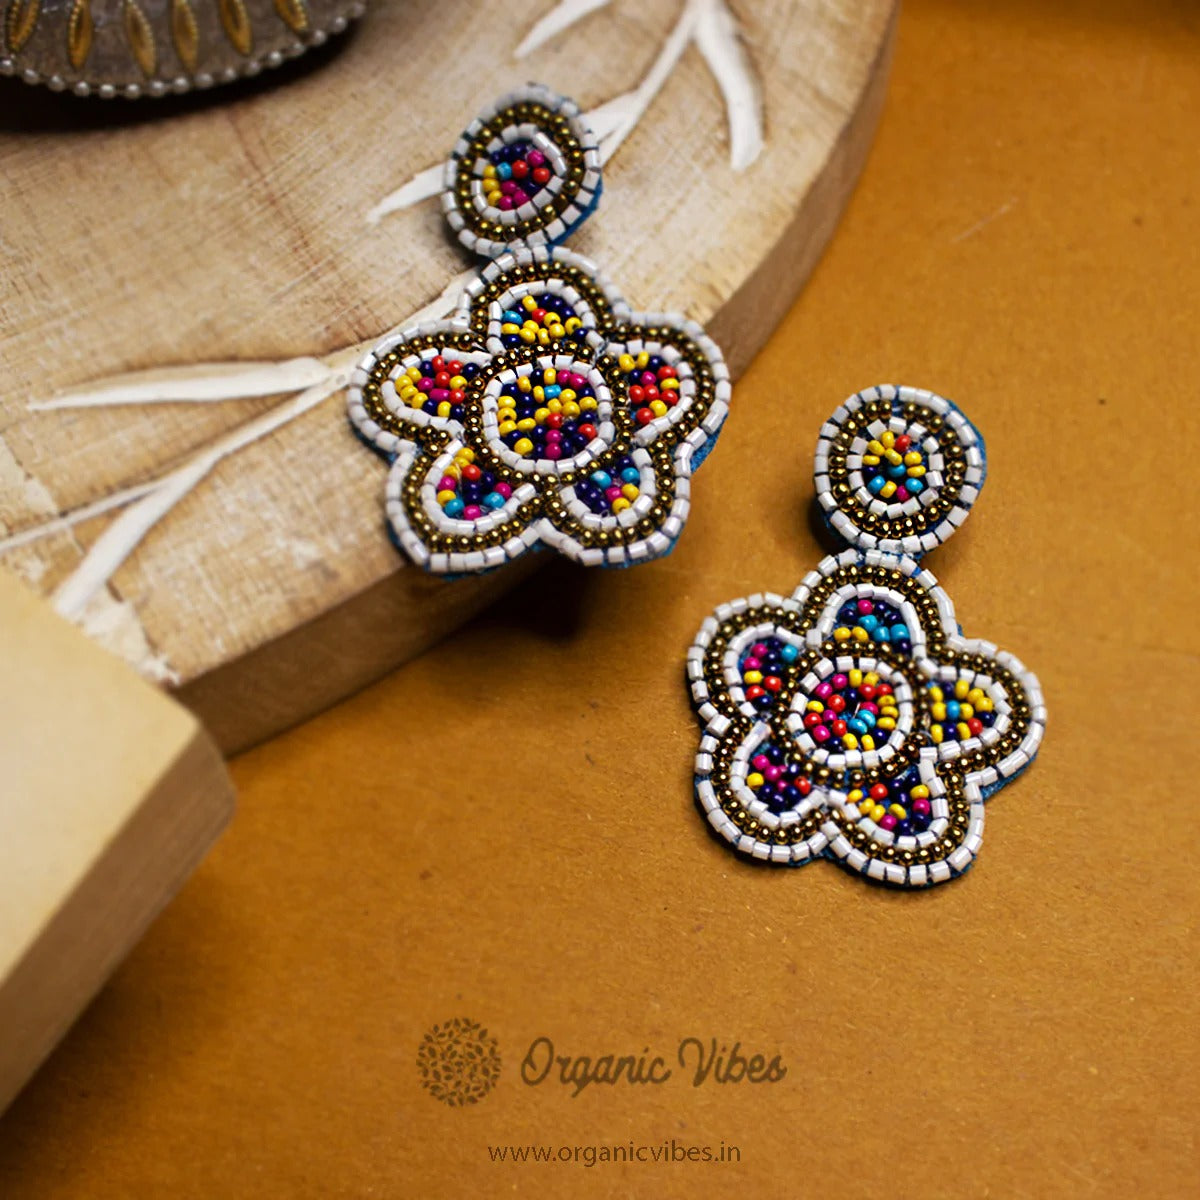 Organic Vibes Multi-color Hand-embroidered Upcycled Floral Beaded Fabric Earrings For Girls